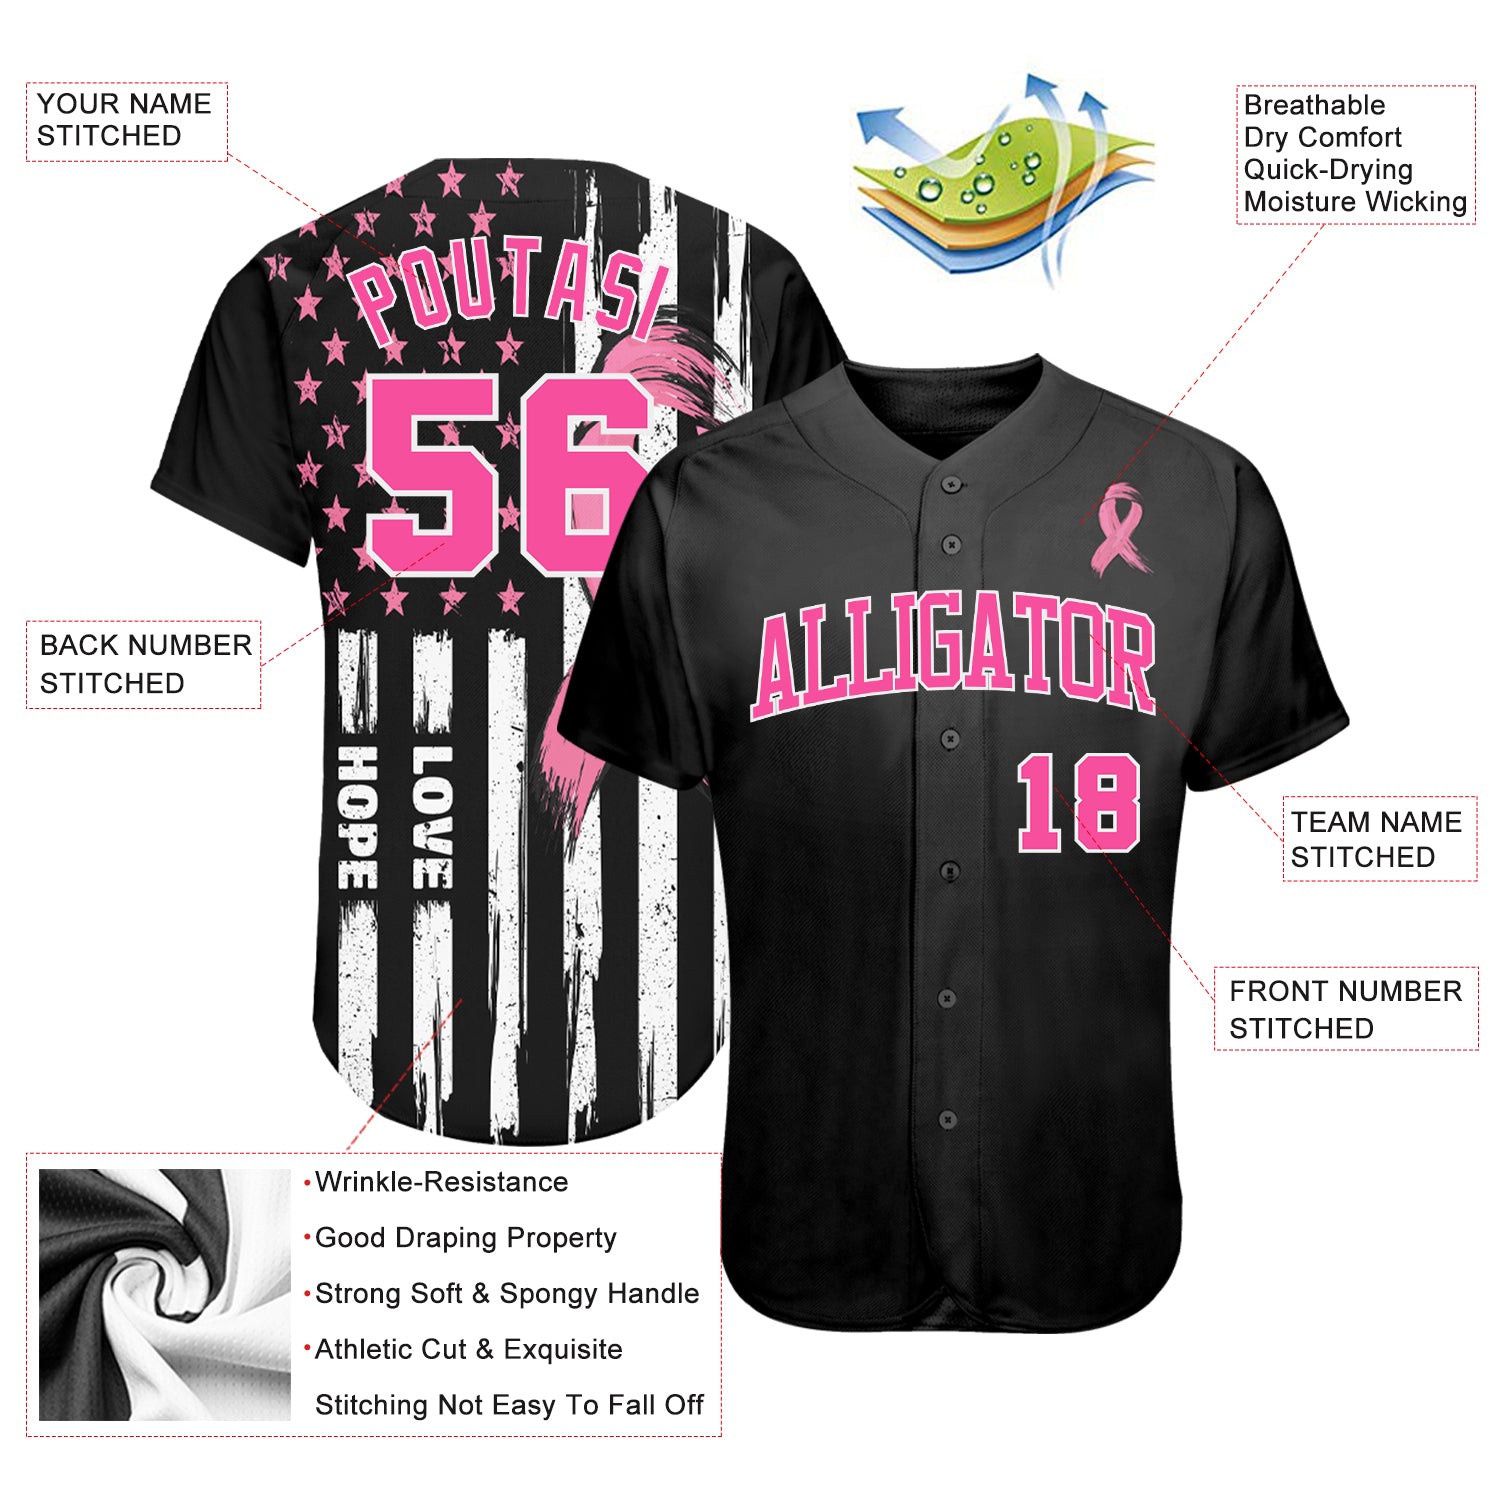 Custom Baseball Jersey 3D American Flag with Pink Ribbon Breast Cancer Awareness Month Women Health Care Support Authentic Men's Size:2XL